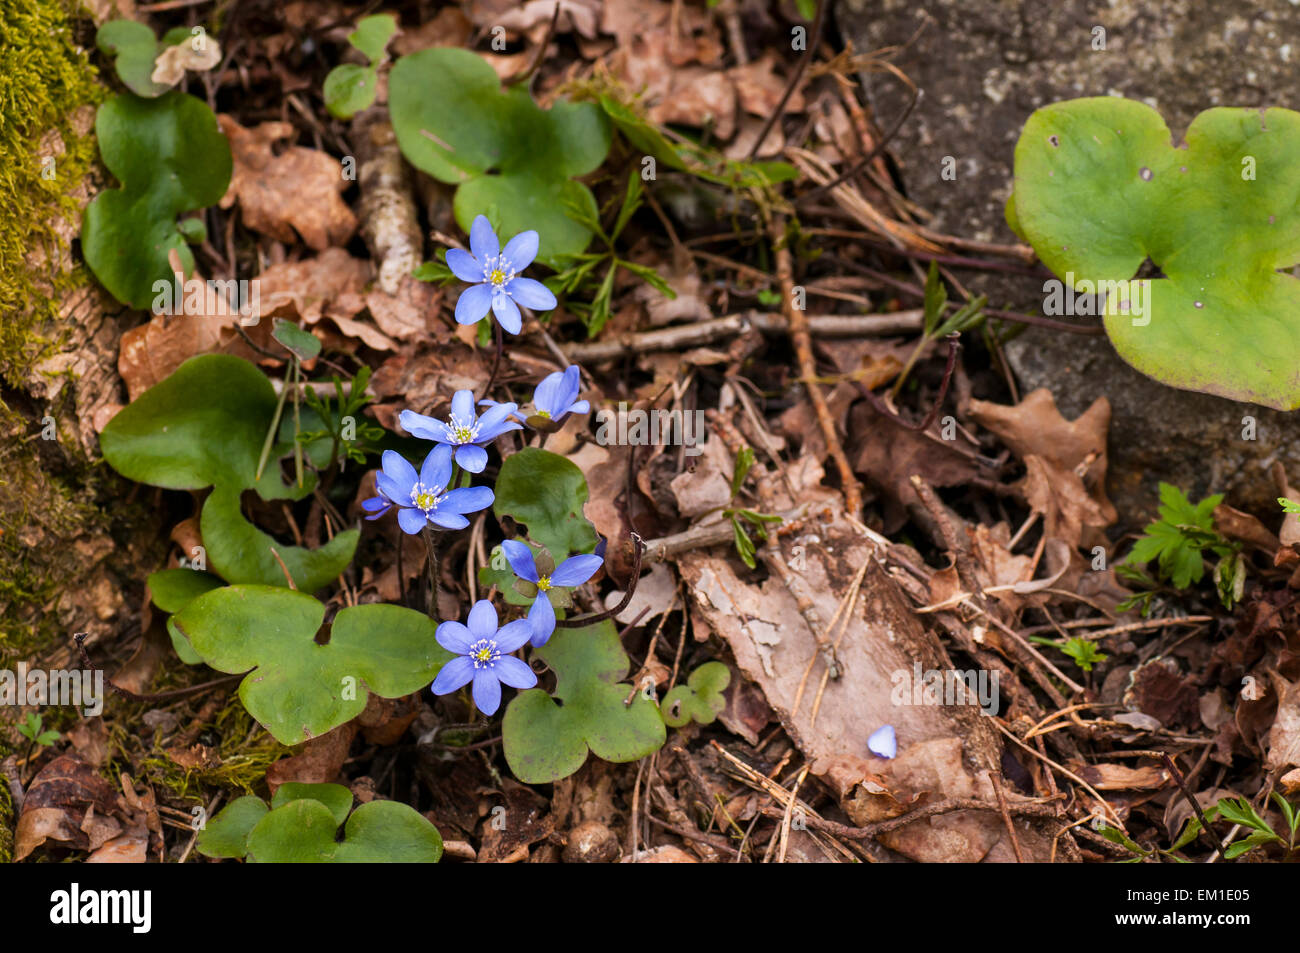 Blooming hepatica in a pile of leaves on a spring day in the forest. Stock Photo